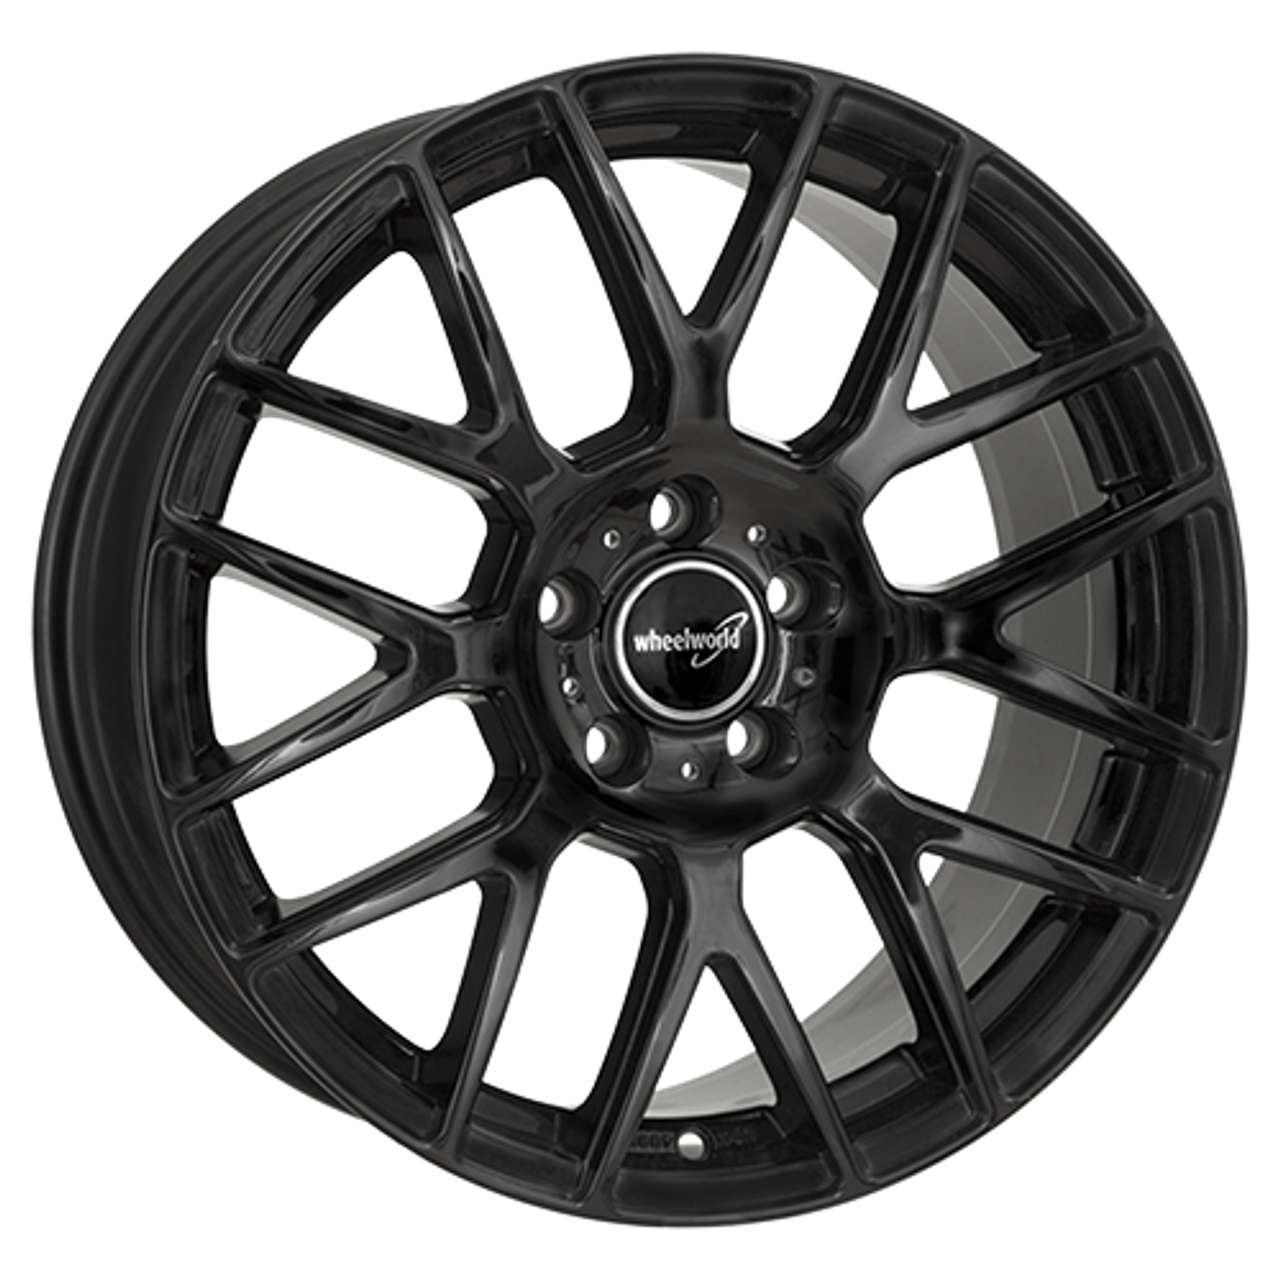 WHEELWORLD-2DRV WH26 black glossy painted 9.0Jx20 5x120 ET45